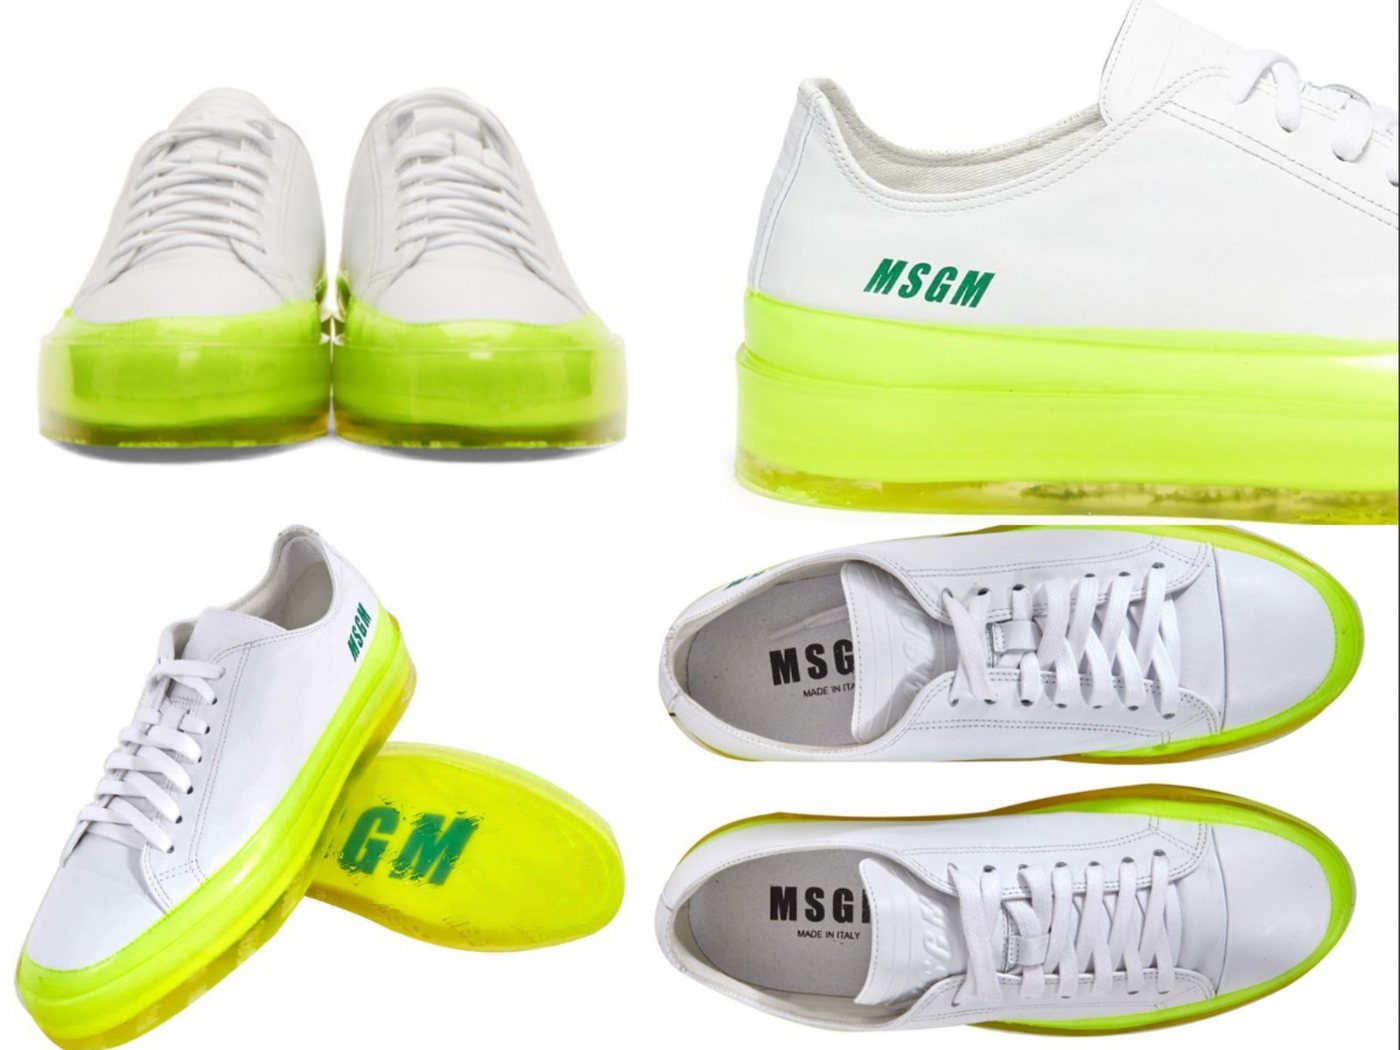 MSGM MSGM RBRSL Rubber Soul Edition Fluo Floating Sneakers Turnschuhe Shoes Sneaker von MSGM